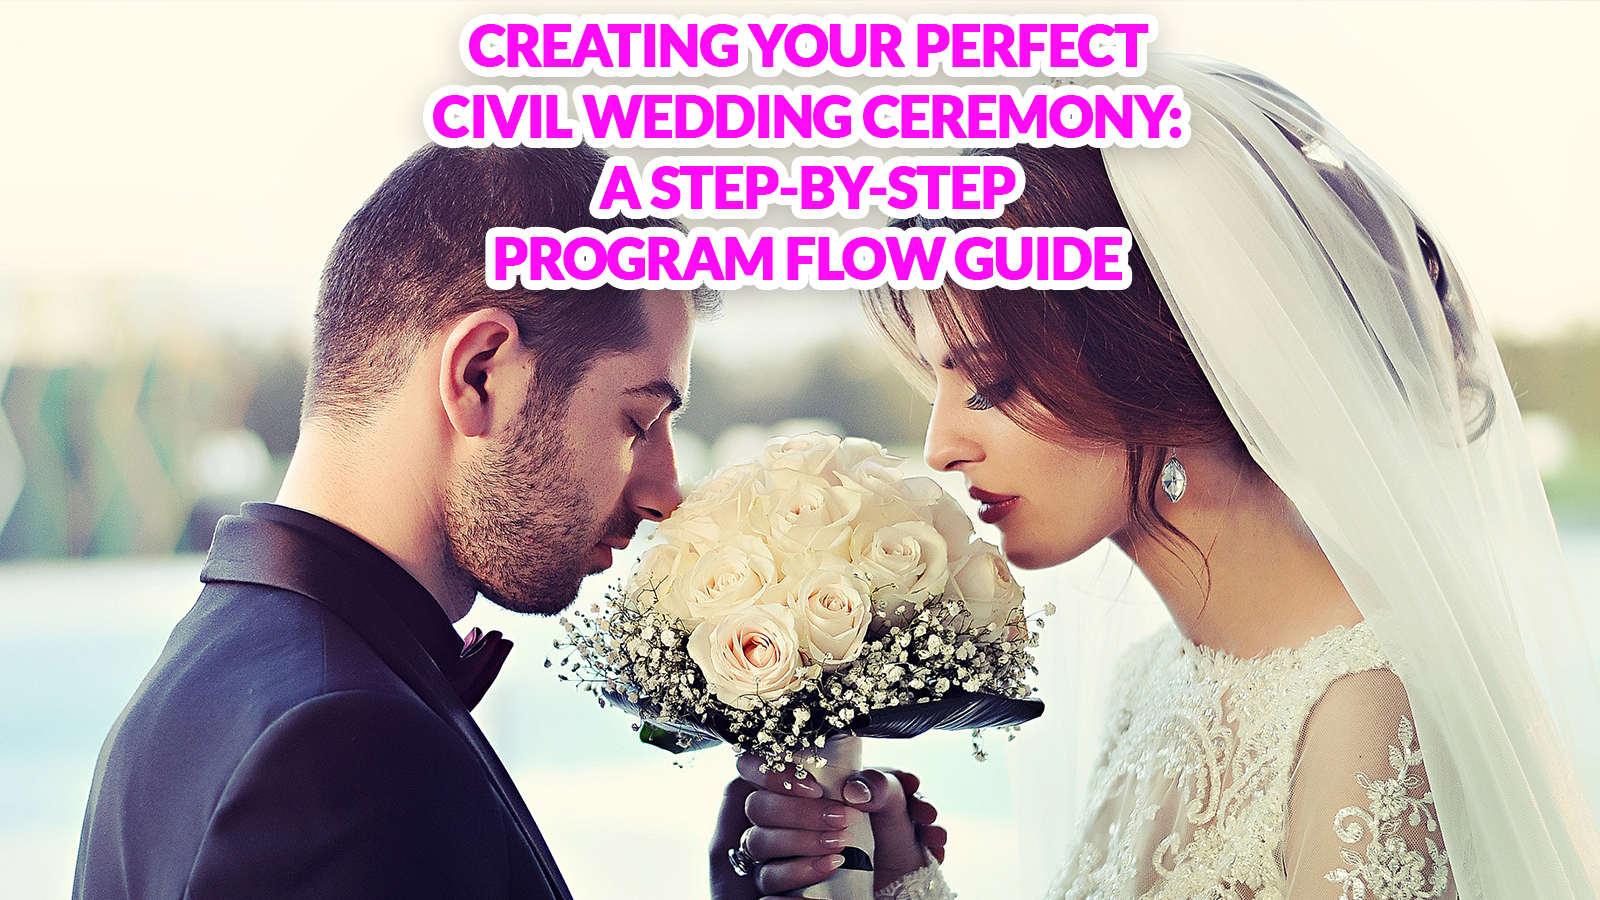 Creating Your Perfect Civil Wedding Ceremony A Step-by-Step Program Flow Guide